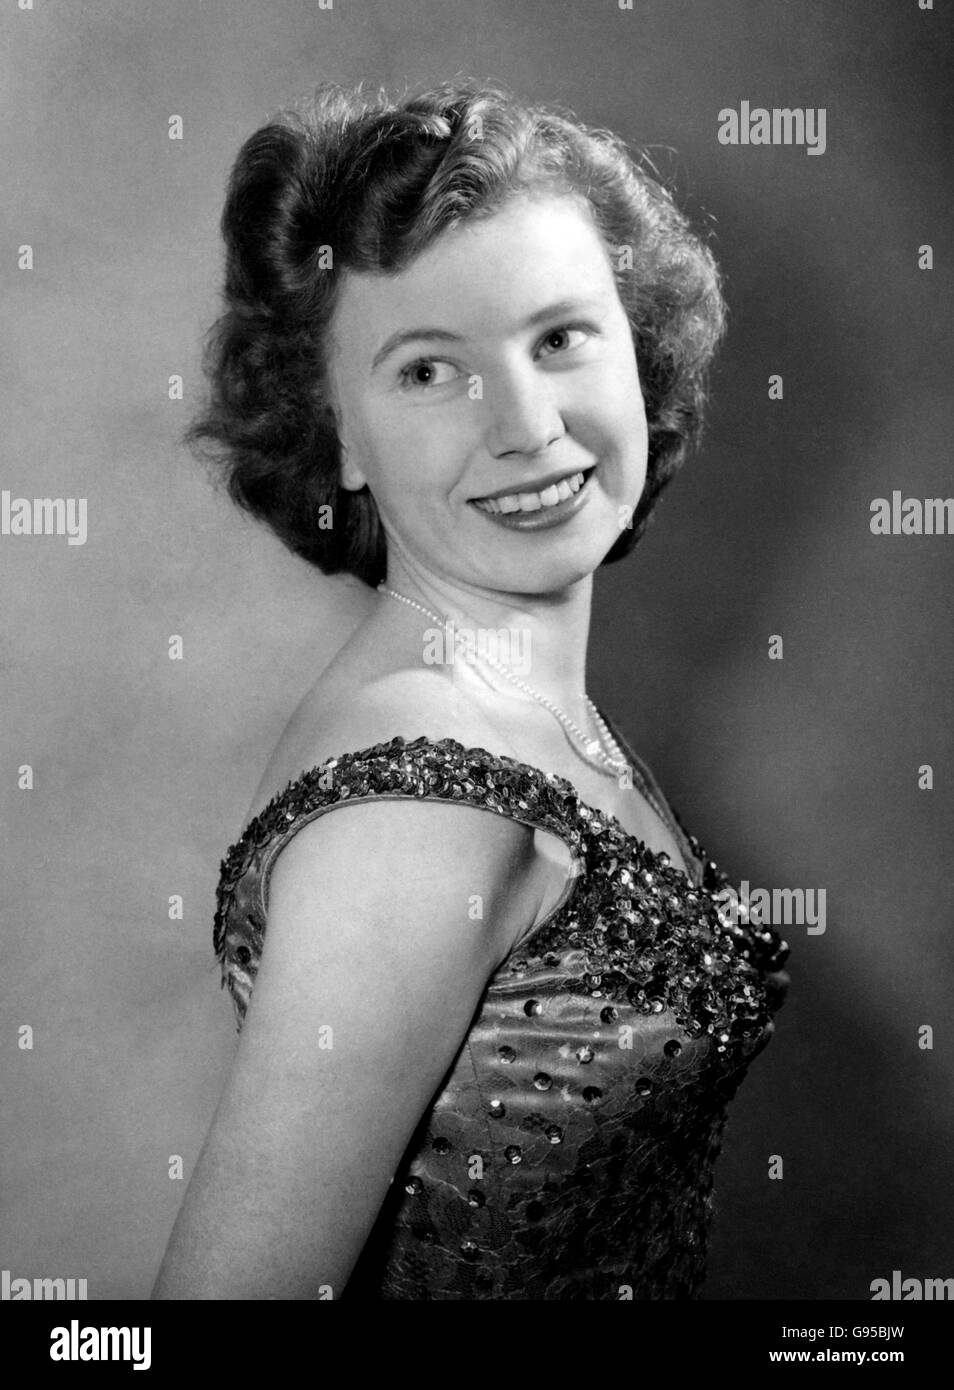 Ruby Murray. Ruby Murray, 19, who become a recording personality after her appearance on TVs 'Quite Contrary'. Stock Photo